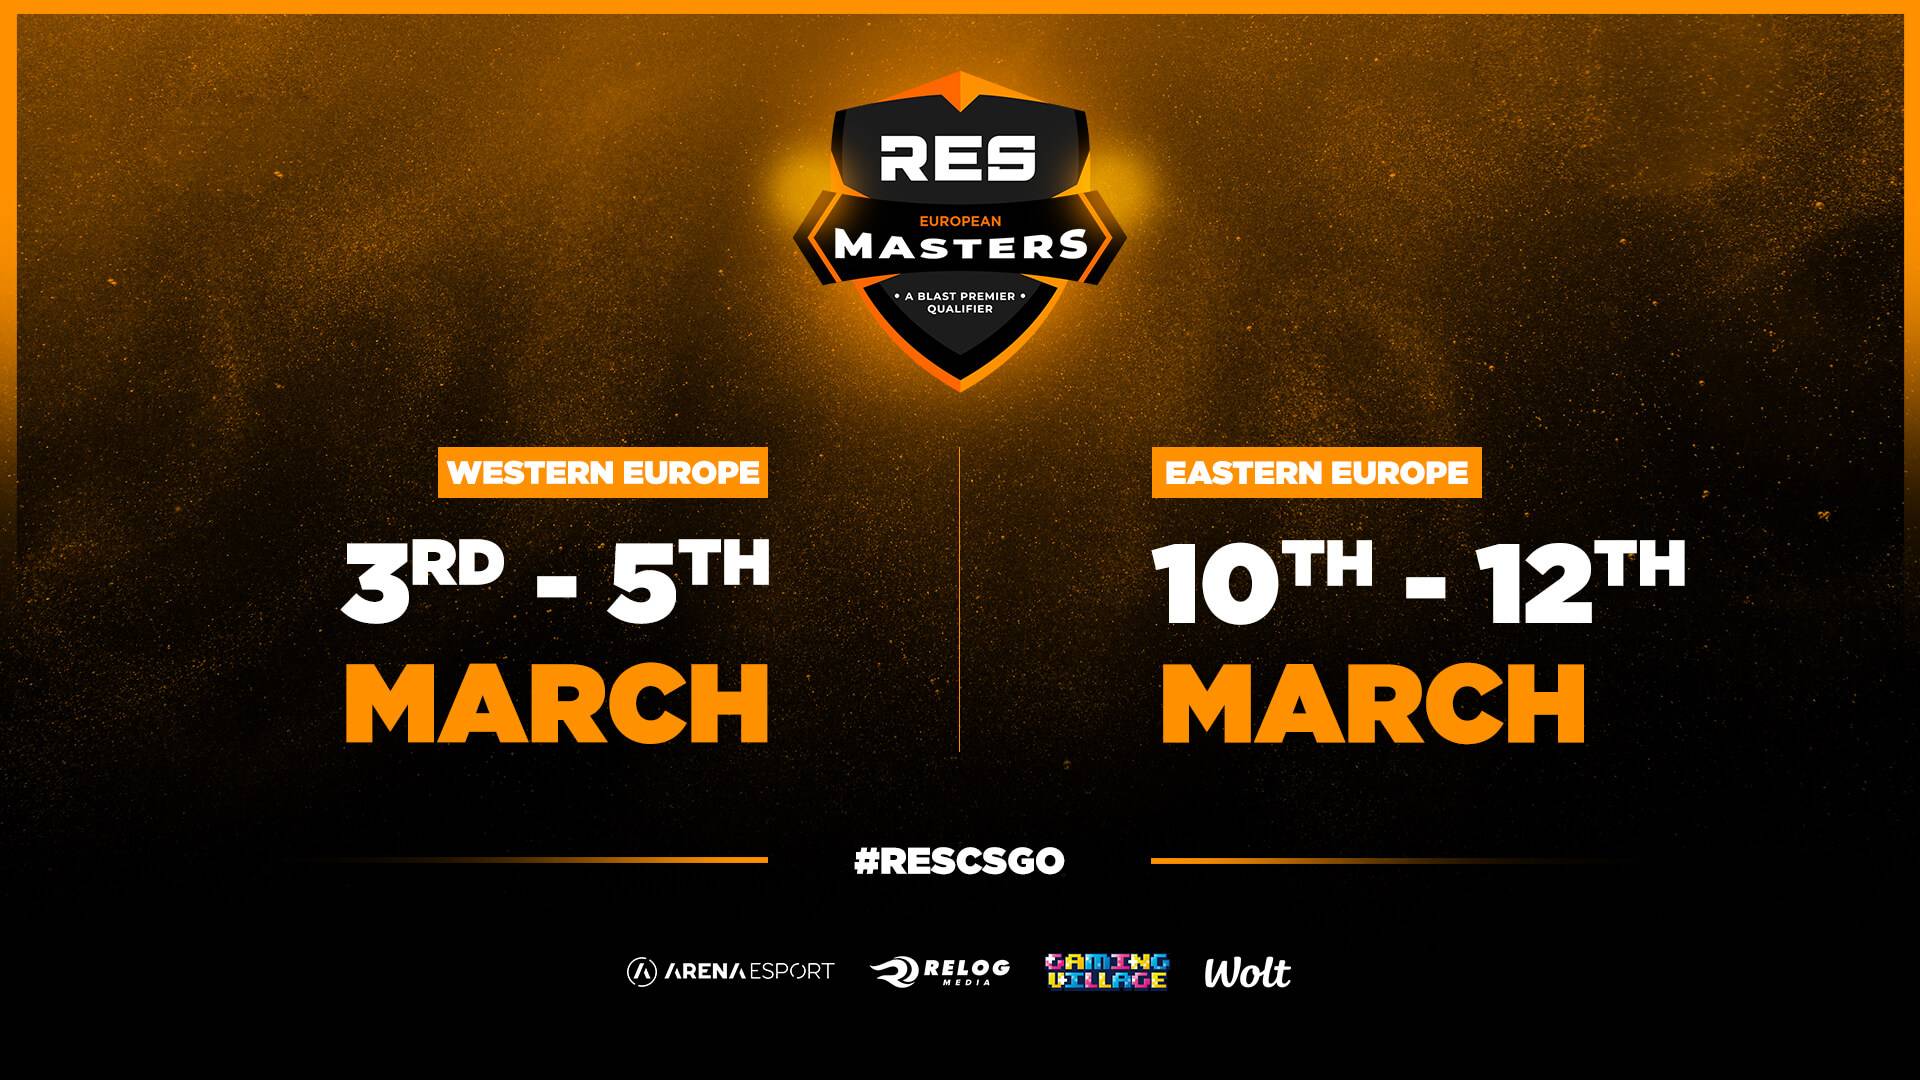 CSGO: RES European Masters Spring team lists are finalized